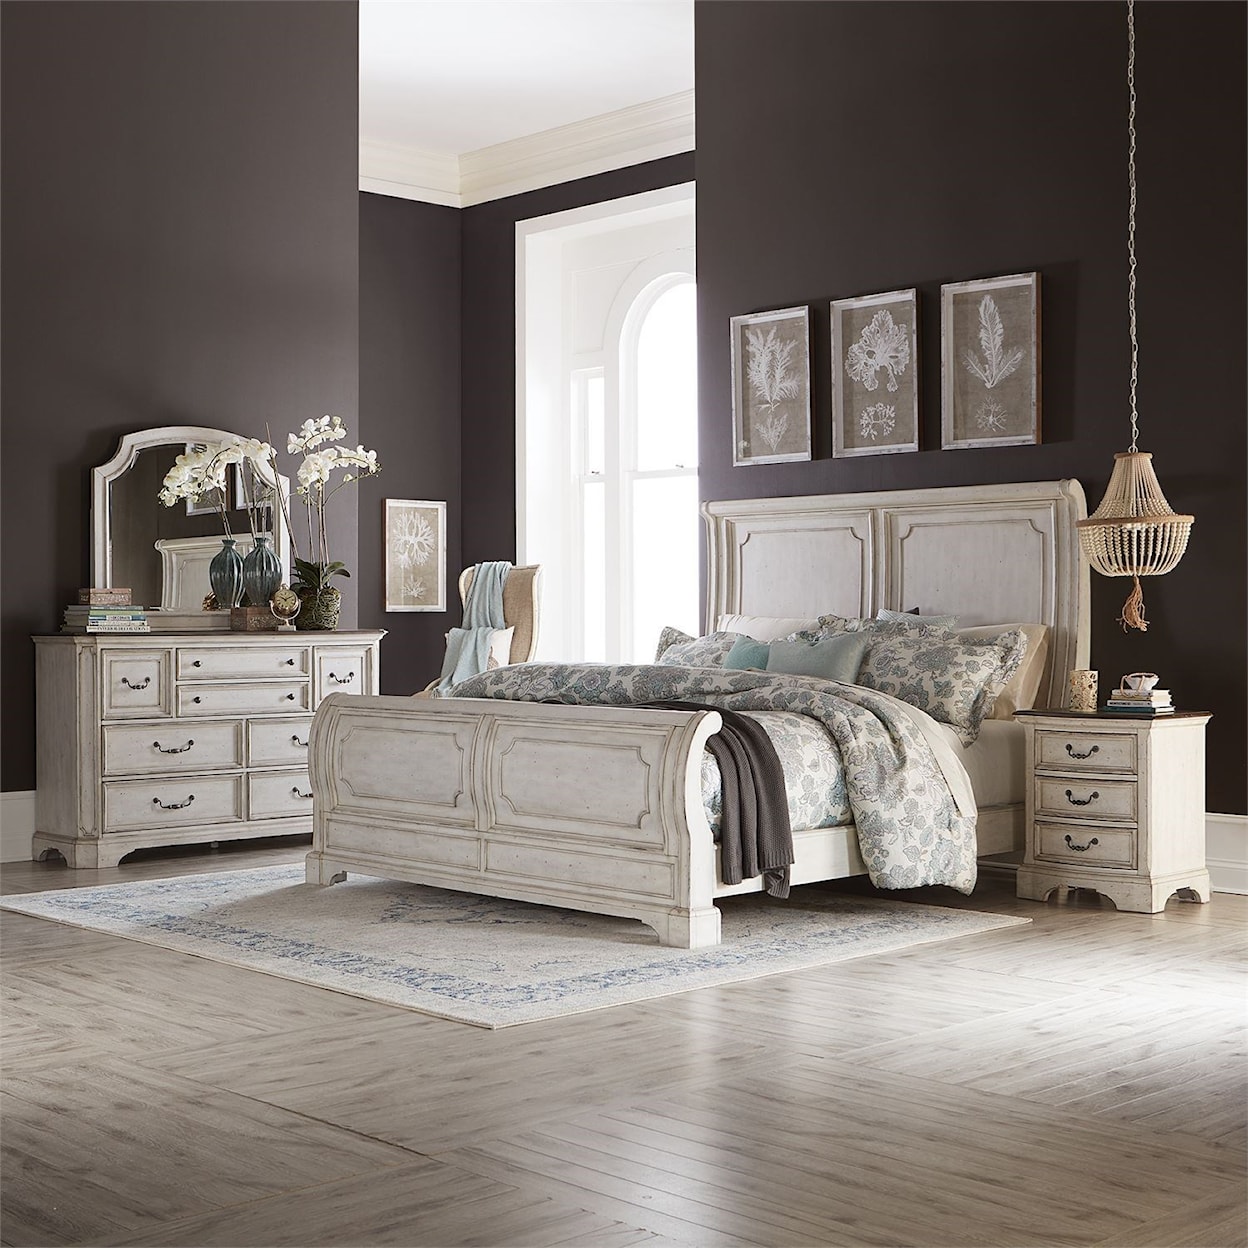 Liberty Furniture Abbey Road Queen Bedroom Group